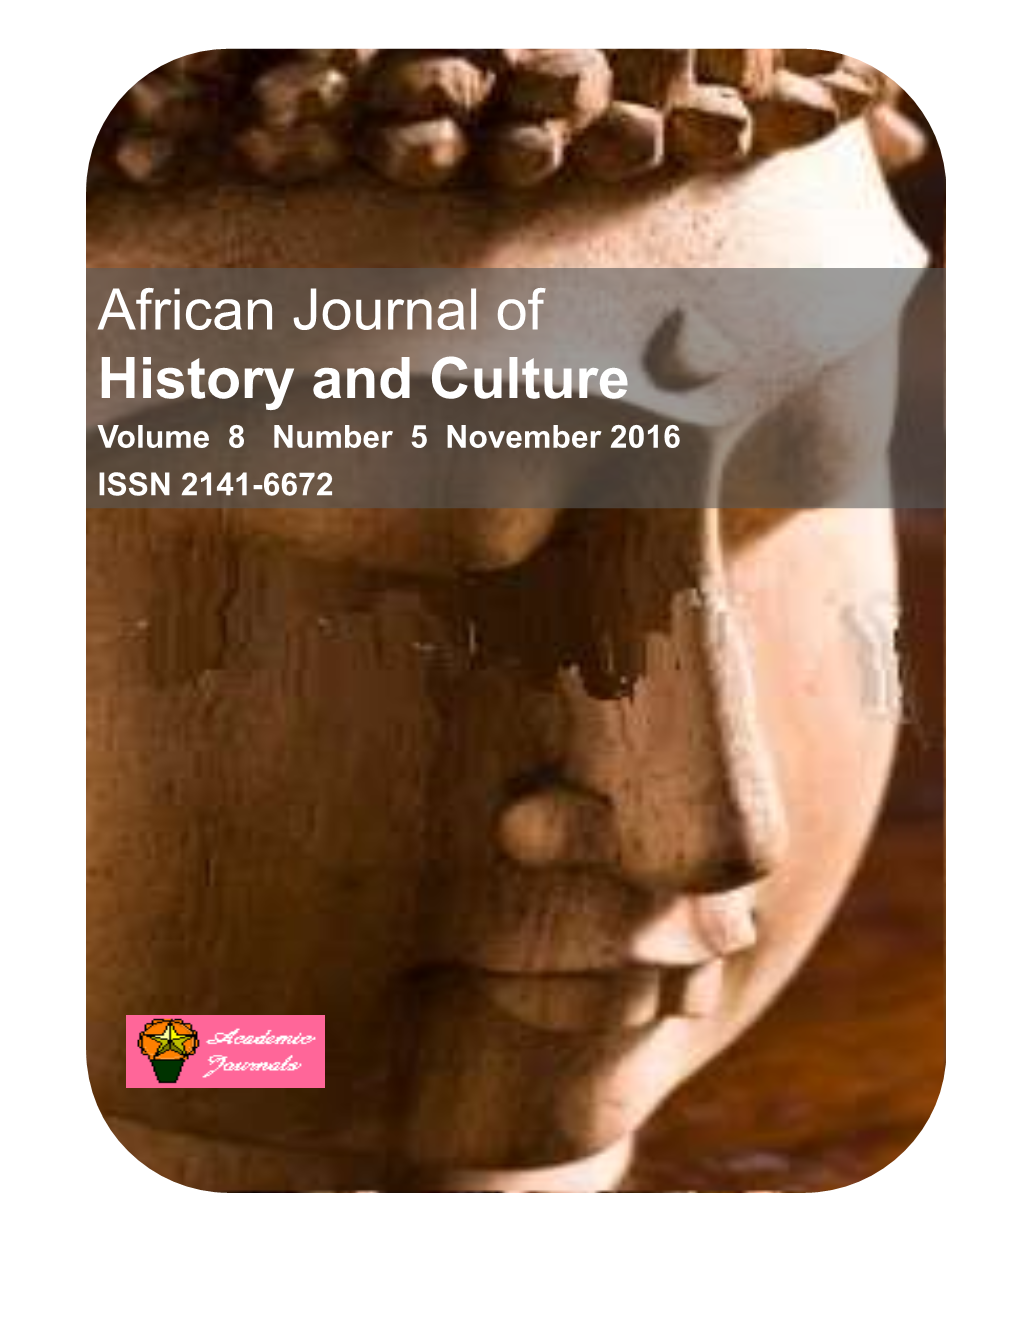 African Journal of History and Culture Volume 8 Number 5 November 2016 ISSN 2141-6672